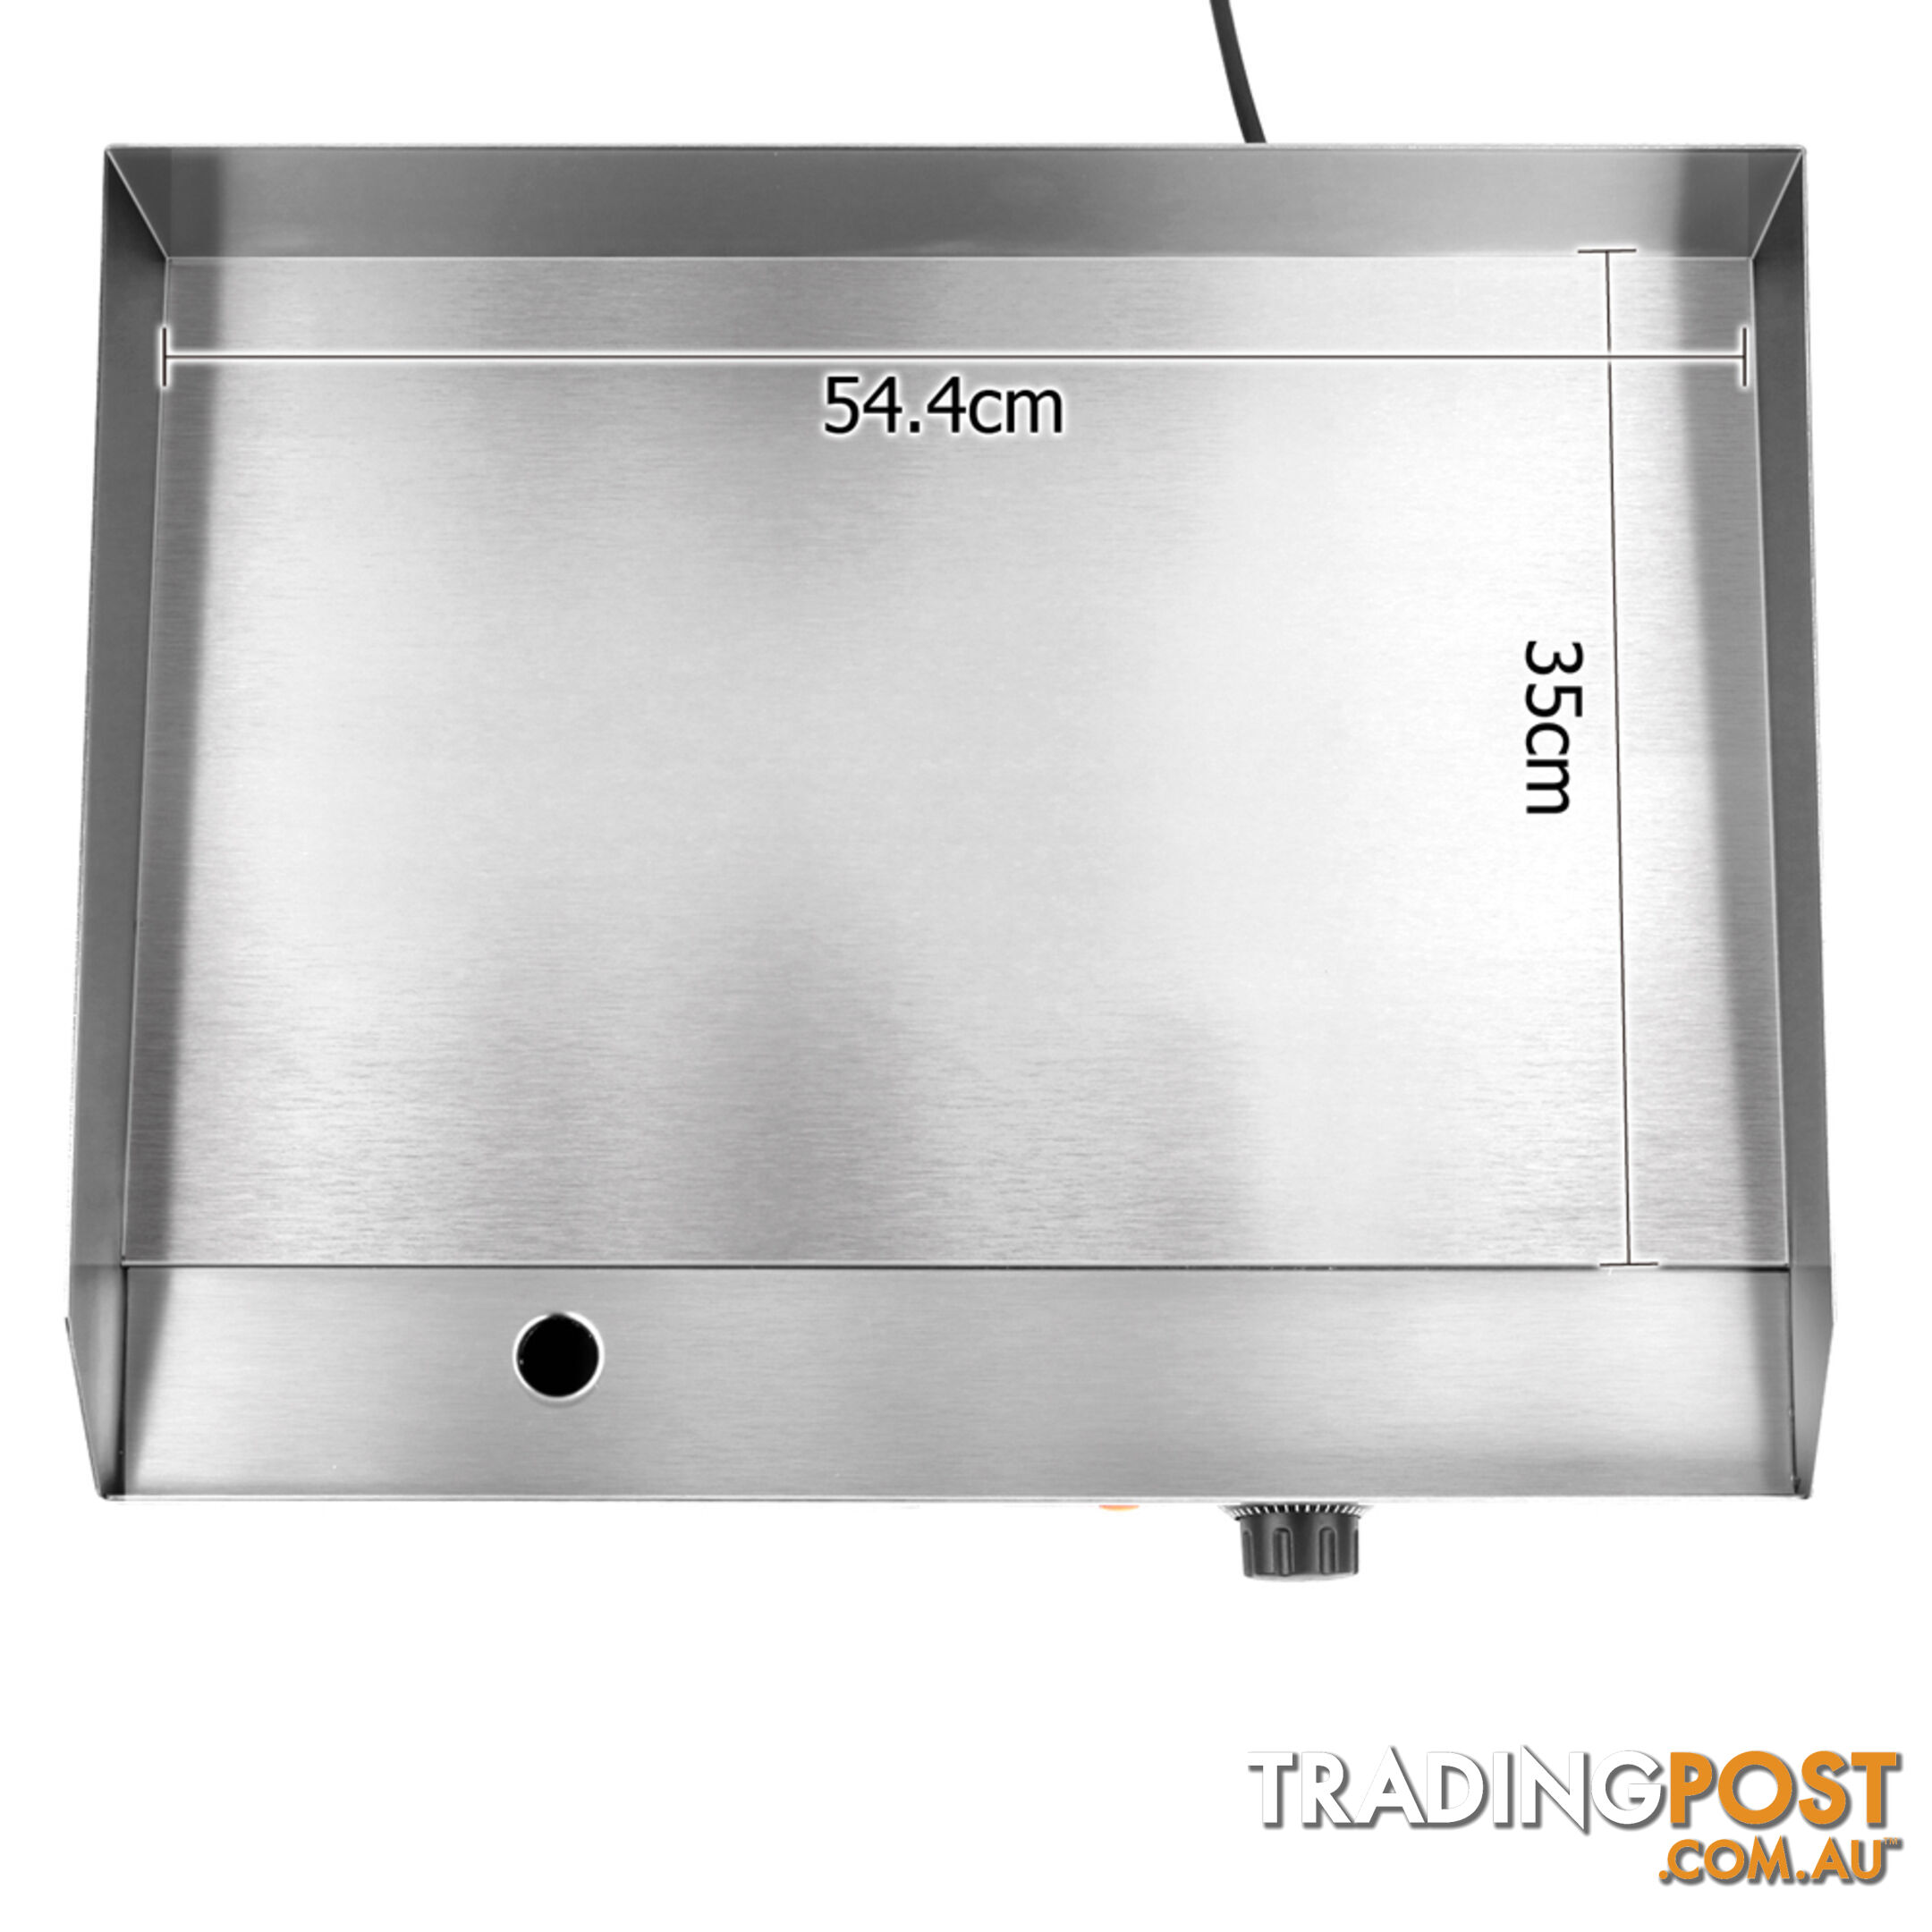 Commercial Electric Griddle BBQ